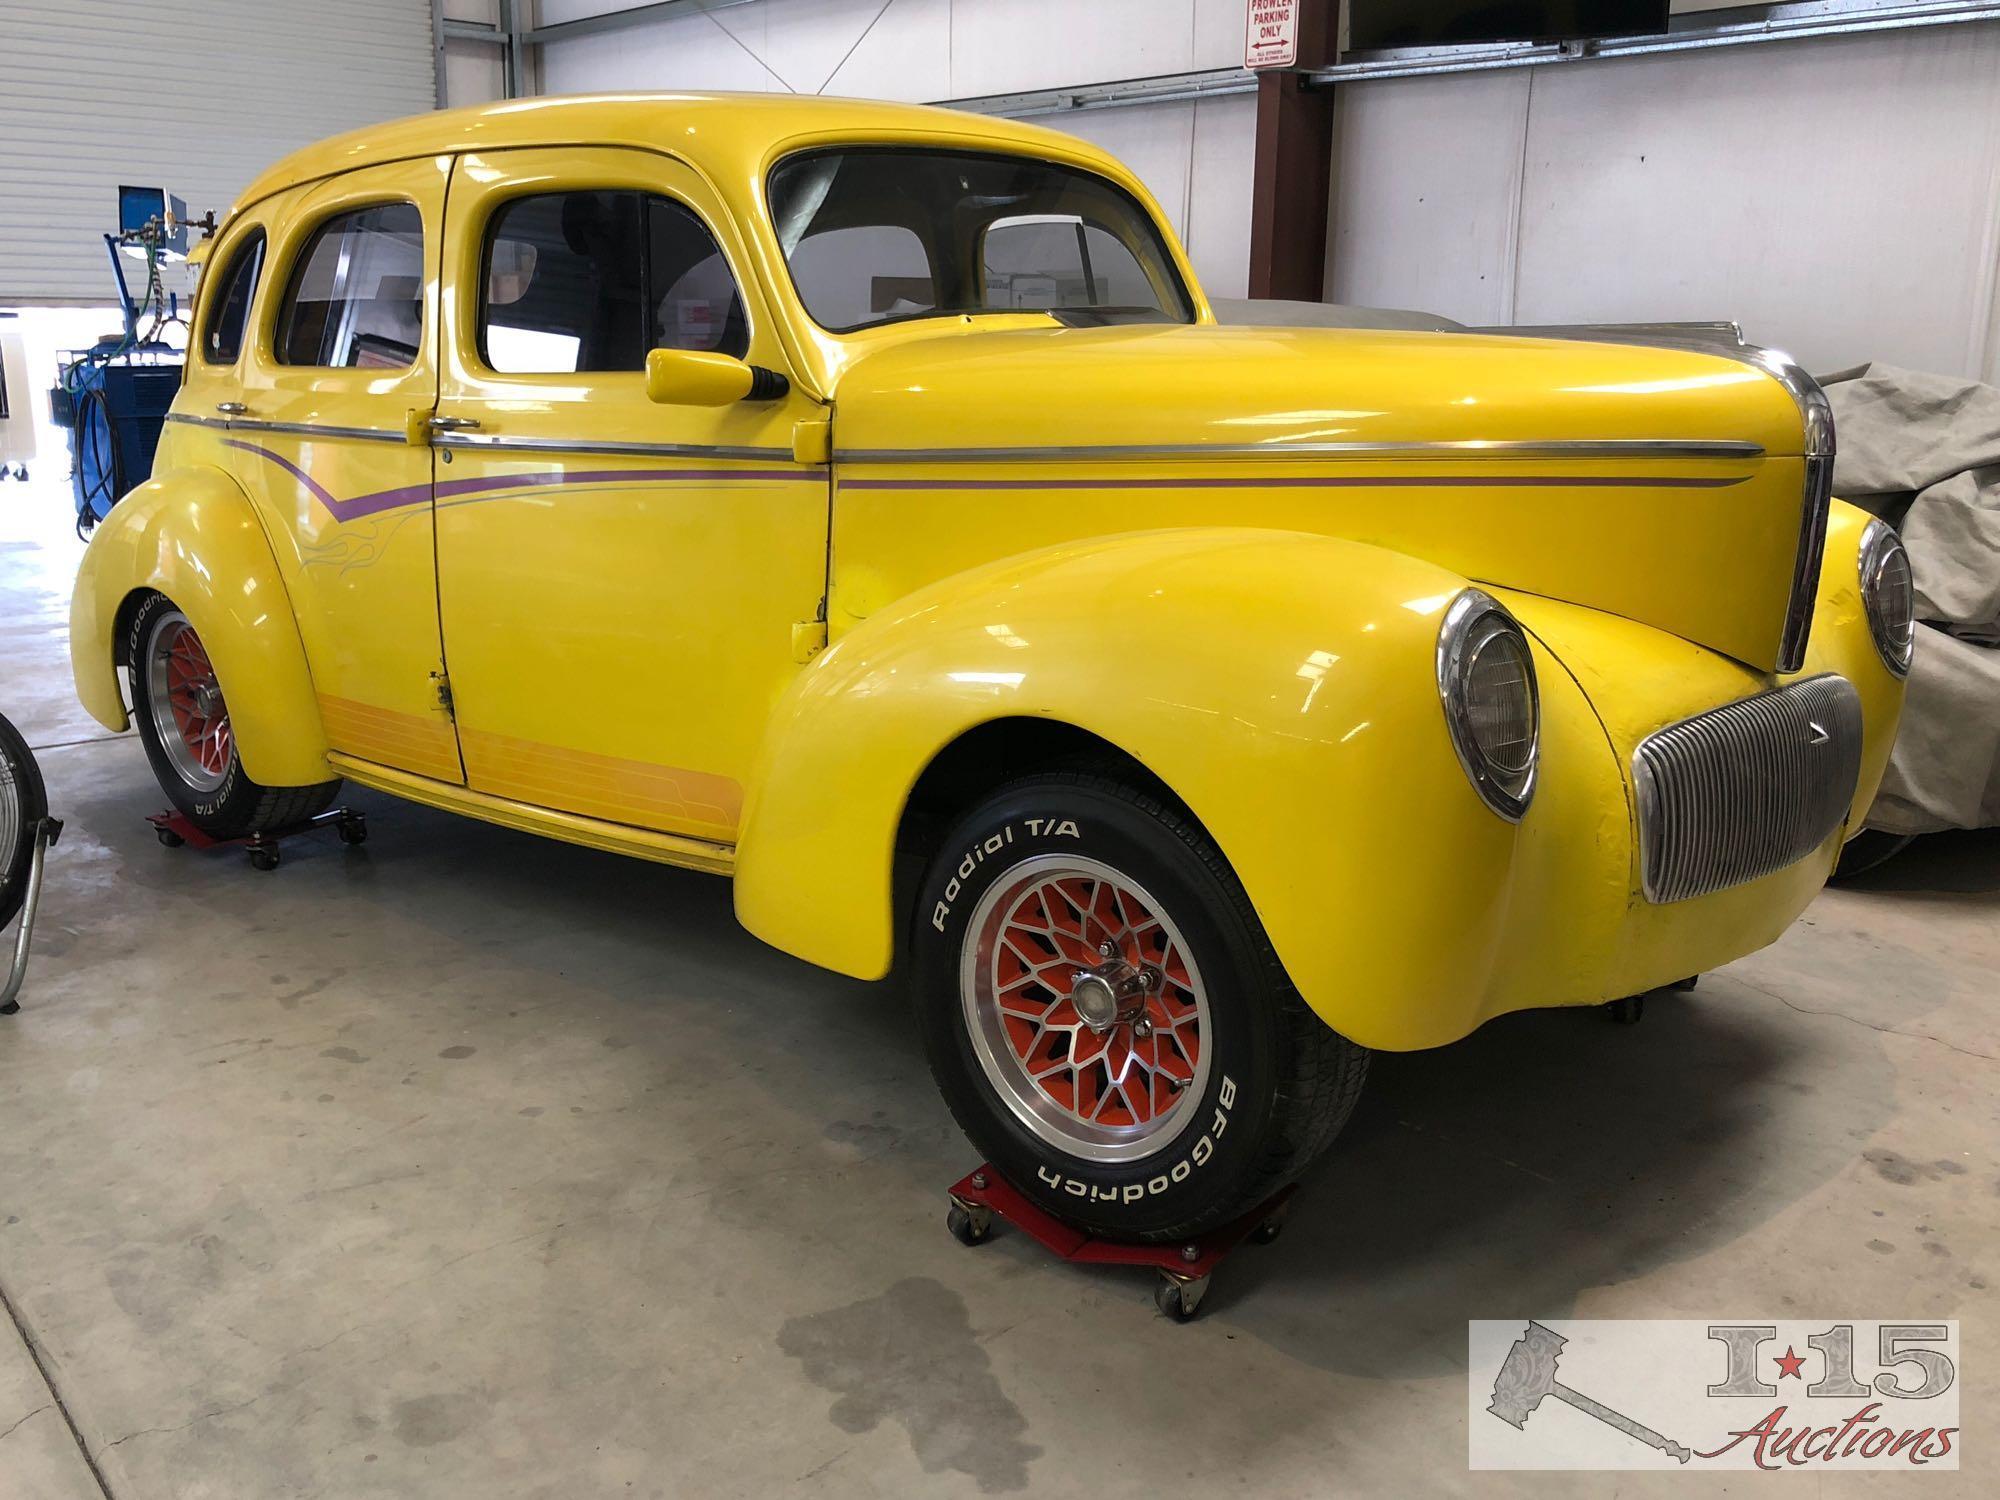 1942 Willy?s Americar 4 door, Original All Steel Body! Rolling Chassis! Please See All Photos!